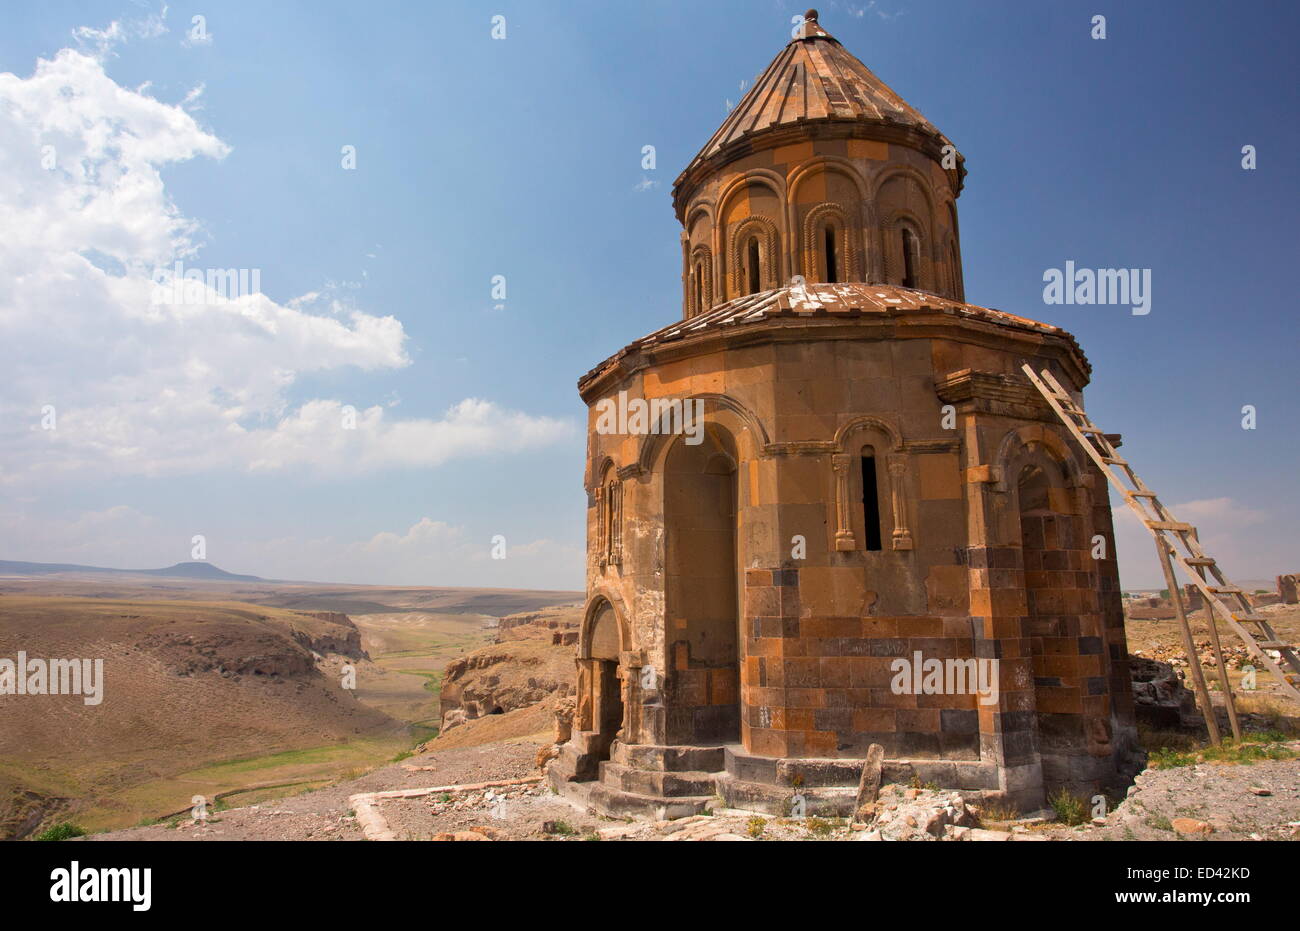 The church of St. Gregory of the Abughamrents at Ani, a remote ruined medieval Armenian Turkish city, north-east Turkey Stock Photo